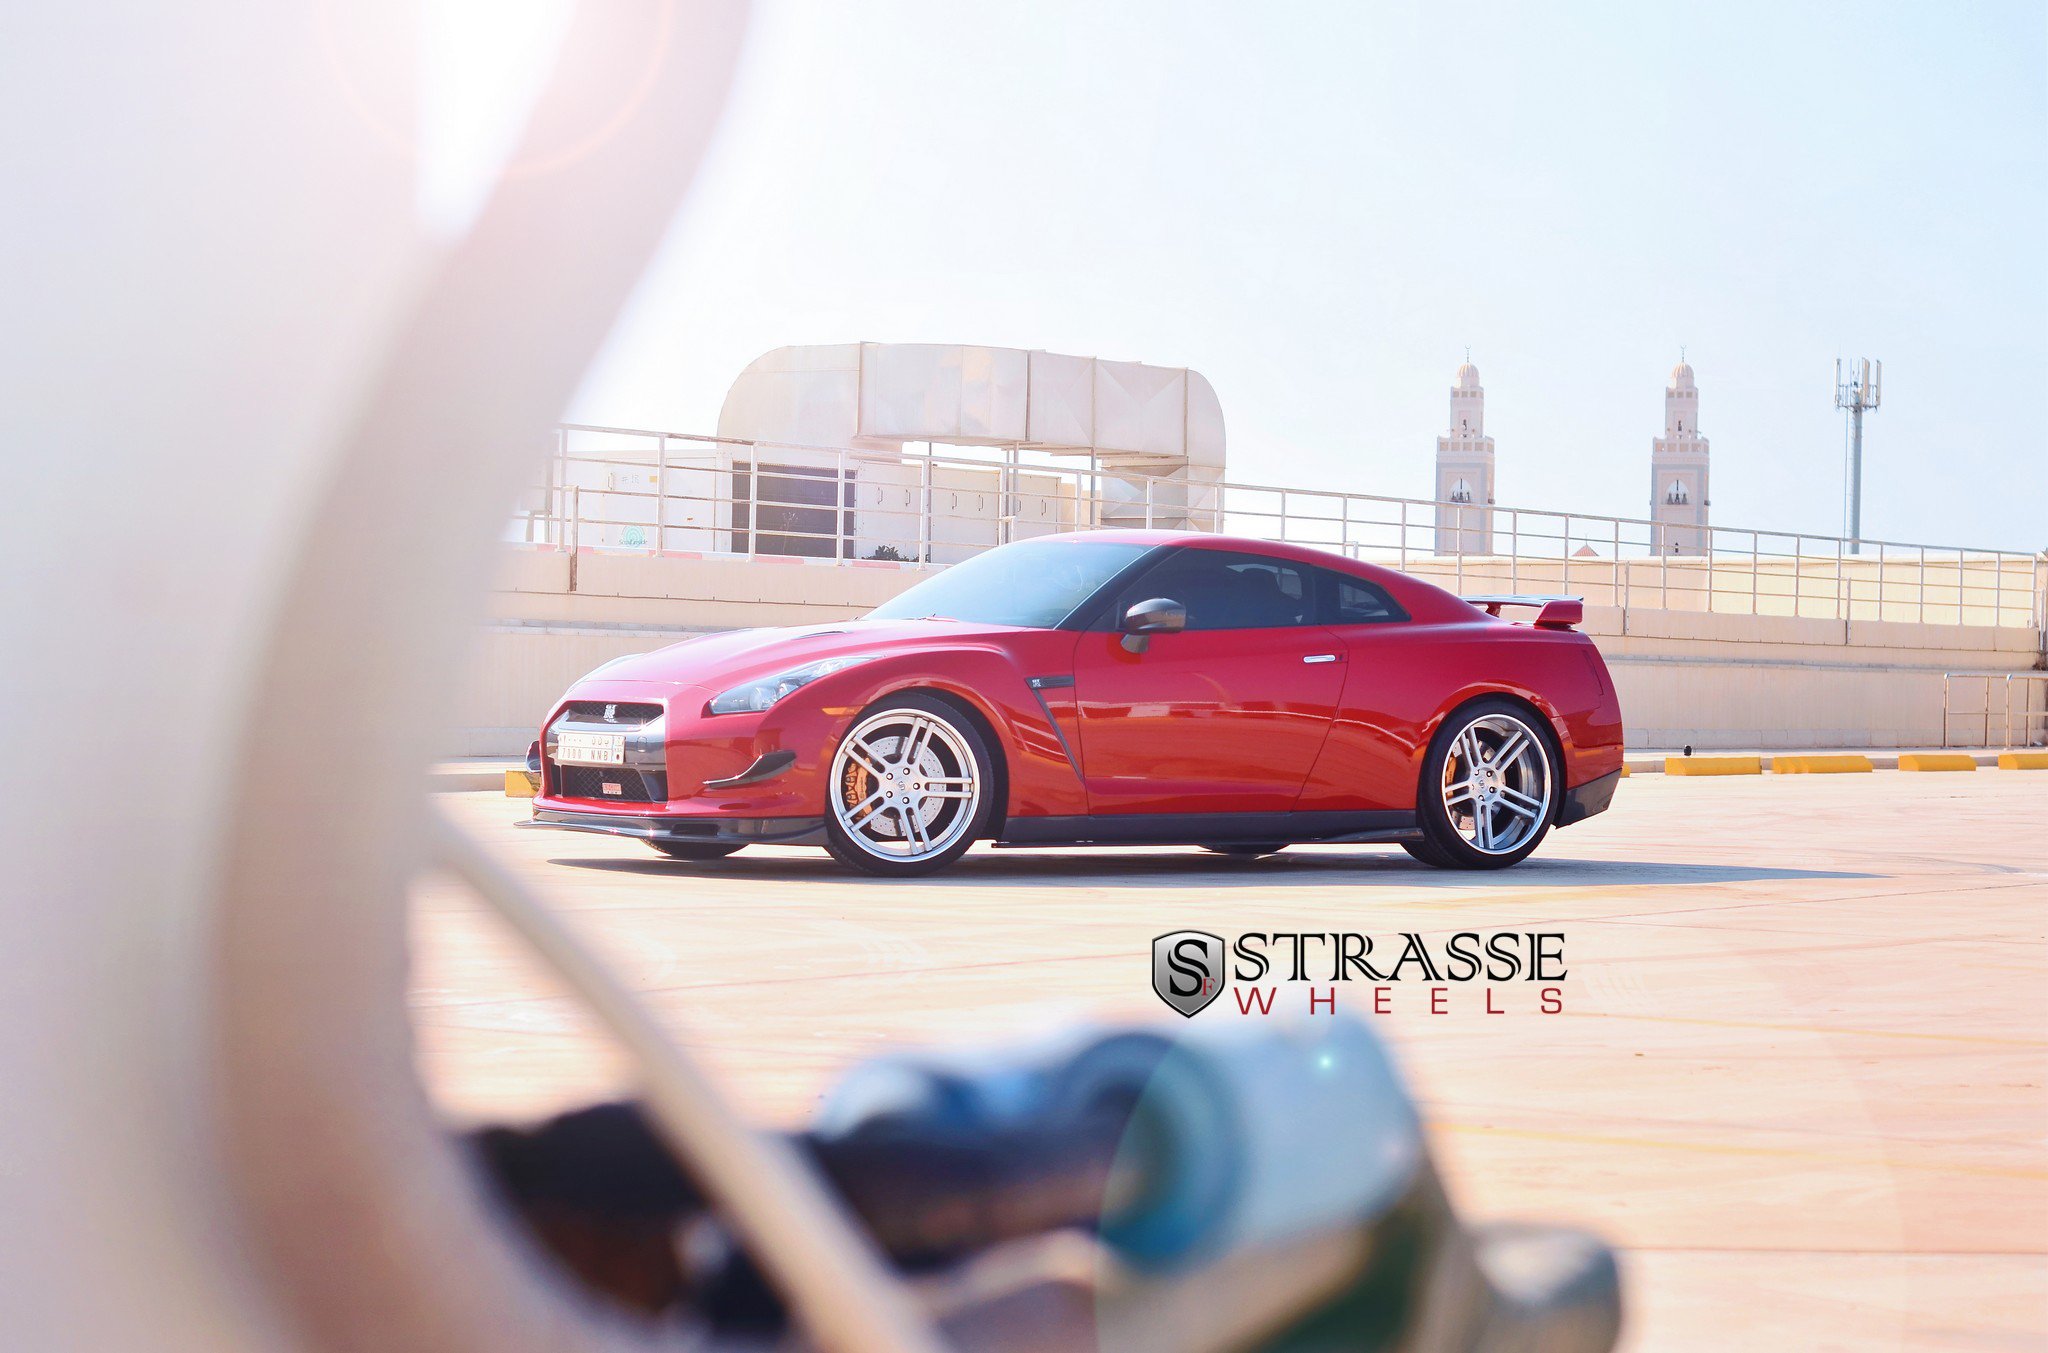 strasse, Wheels, Gt r, Nissan, Cars, Coupe Wallpaper